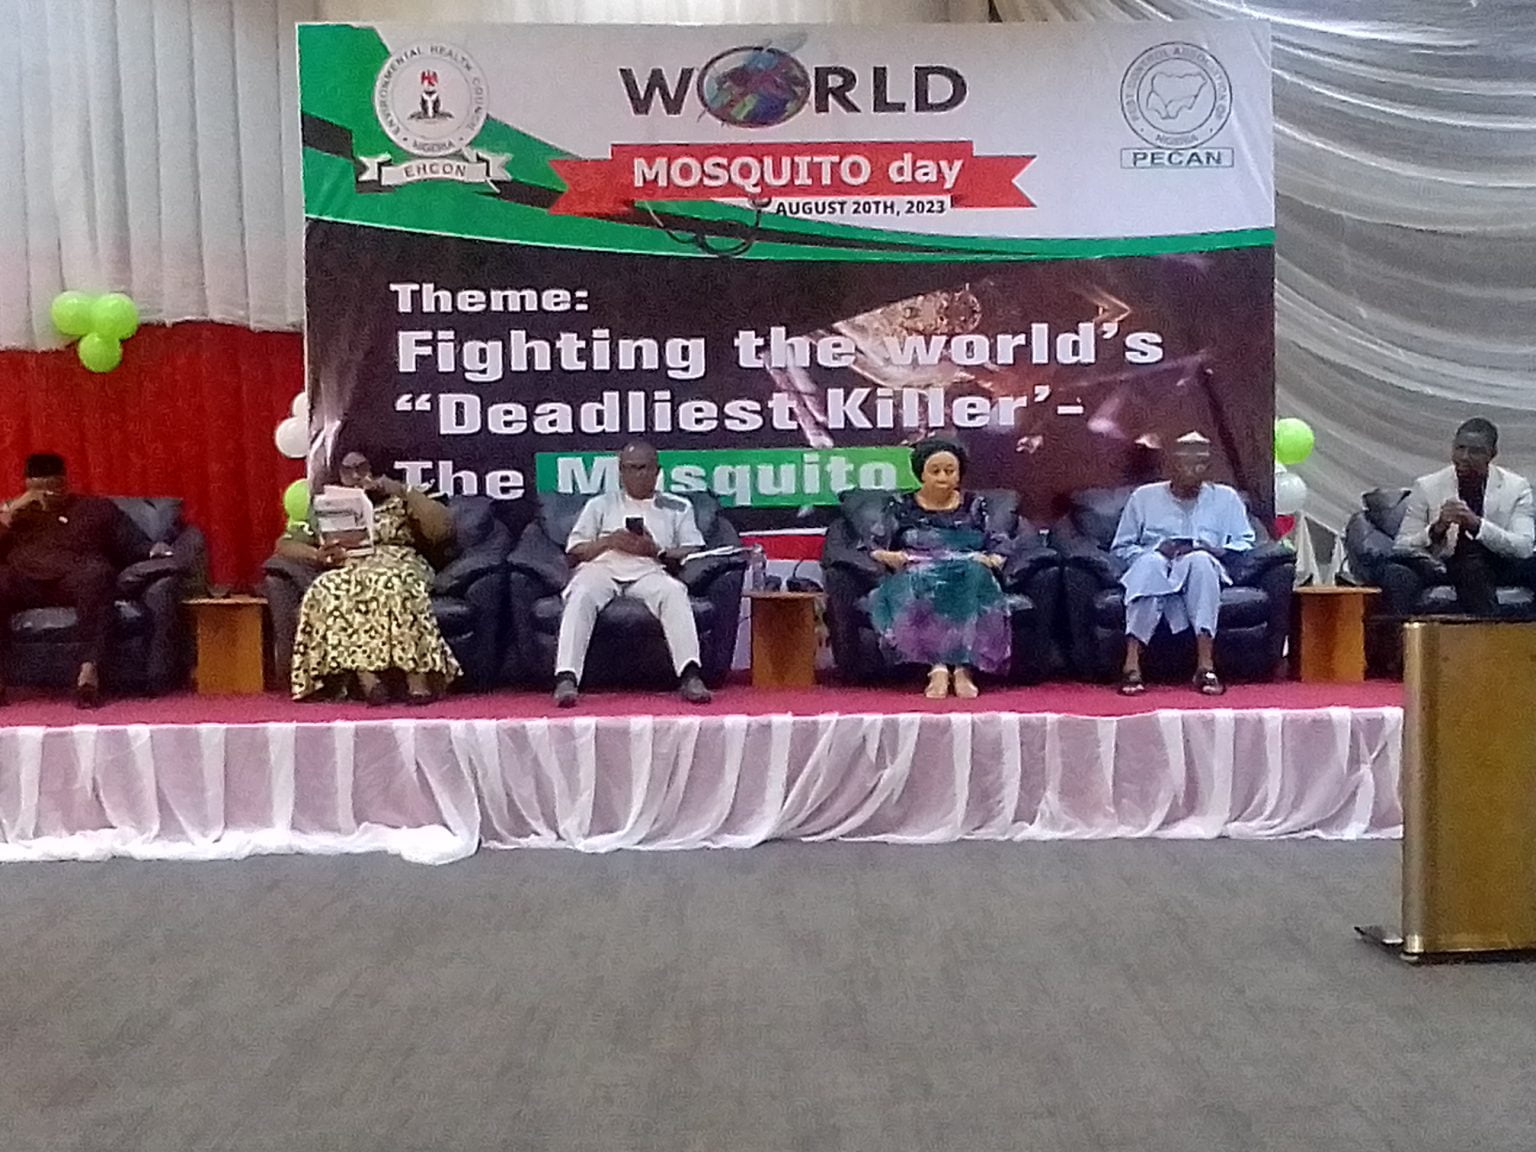 MediaageNG It's Imperative To Increase The Fight Against Mosquitoes - EHCON Abuja - August 22 - (Mediaage NG News) - The Registrar of the Environmental Health Council of Nigeria (EHCON), Dr. Yakubu Mohammed Babe, on Monday at a symposium commemorating World Malaria Day in the Nigerian capital, Abuja, said it's imperative to take the fight against mosquitoes and its parasites more seriously because, once the activities of mosquitoes are controlled, other value chain in Malaria control will become "a walk over".